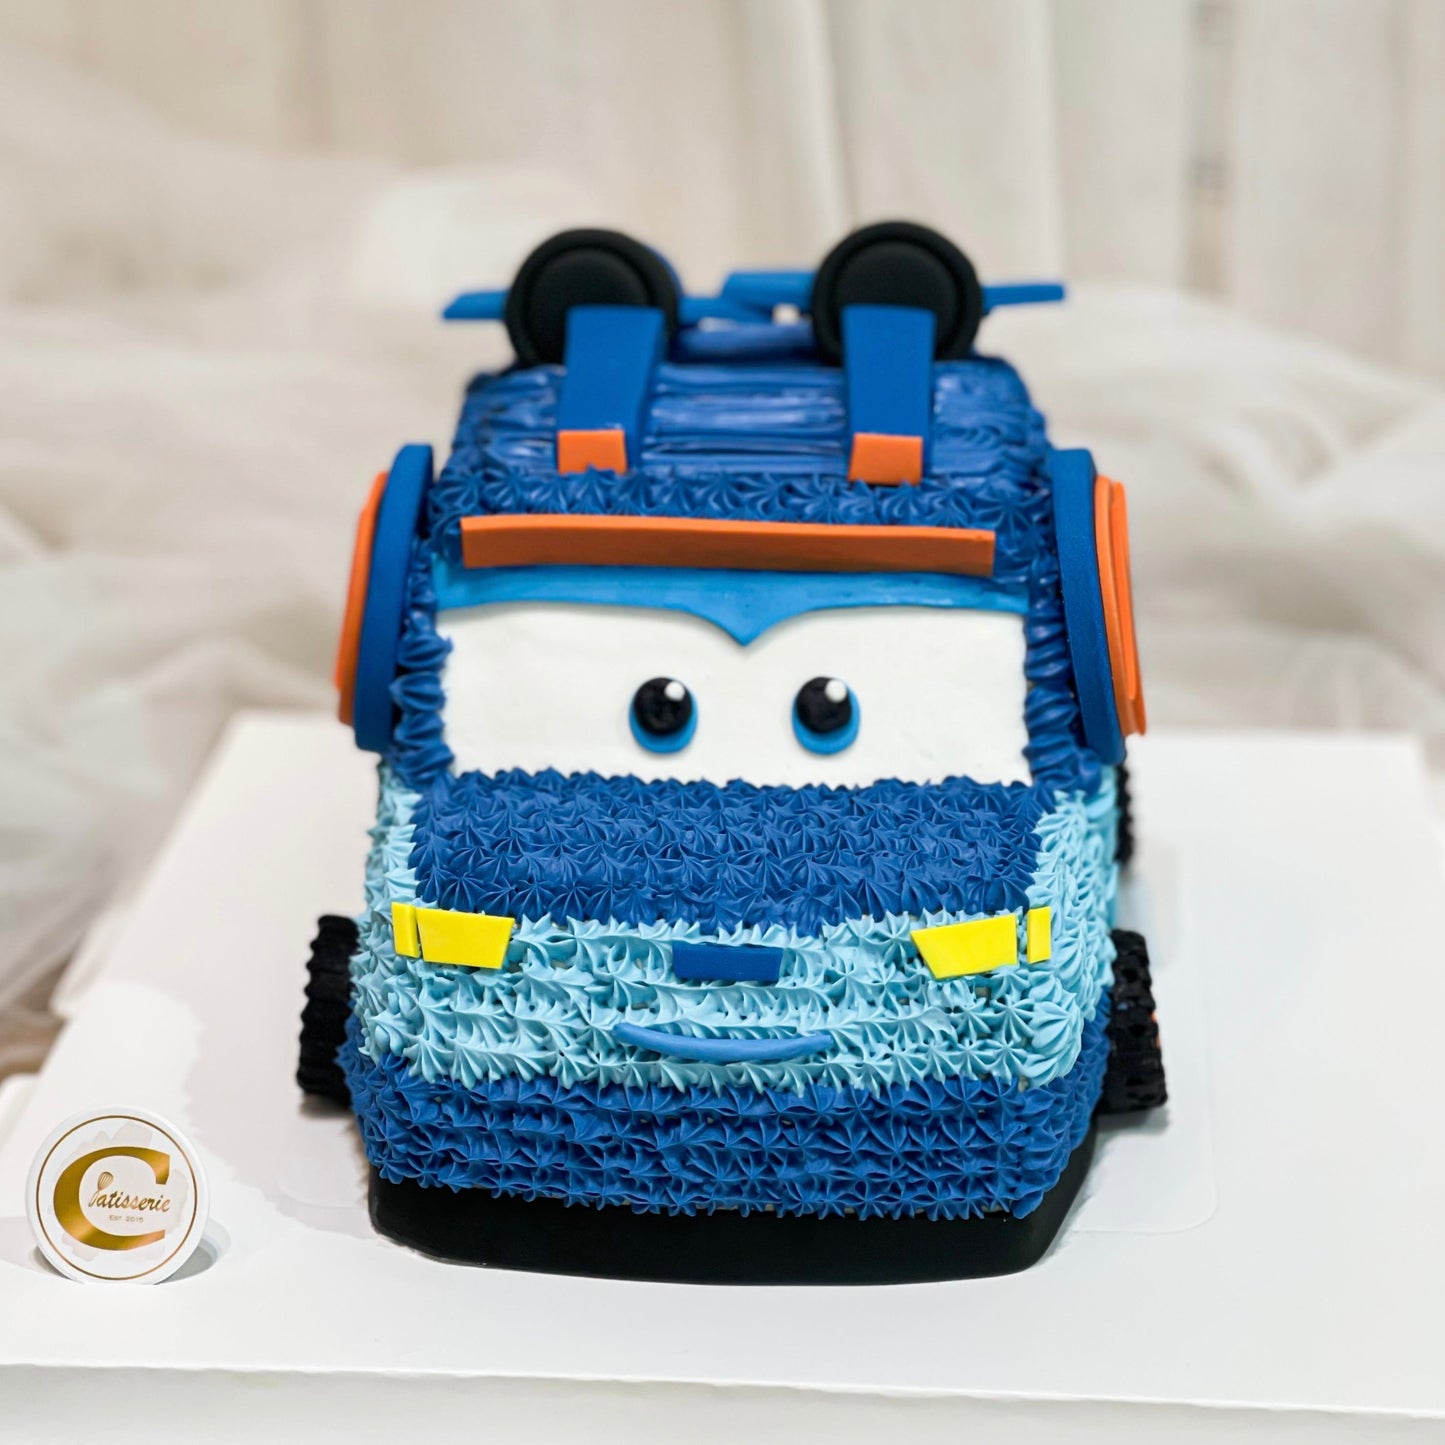 Sculpted 3D Car Shaped Cake: Toy Car